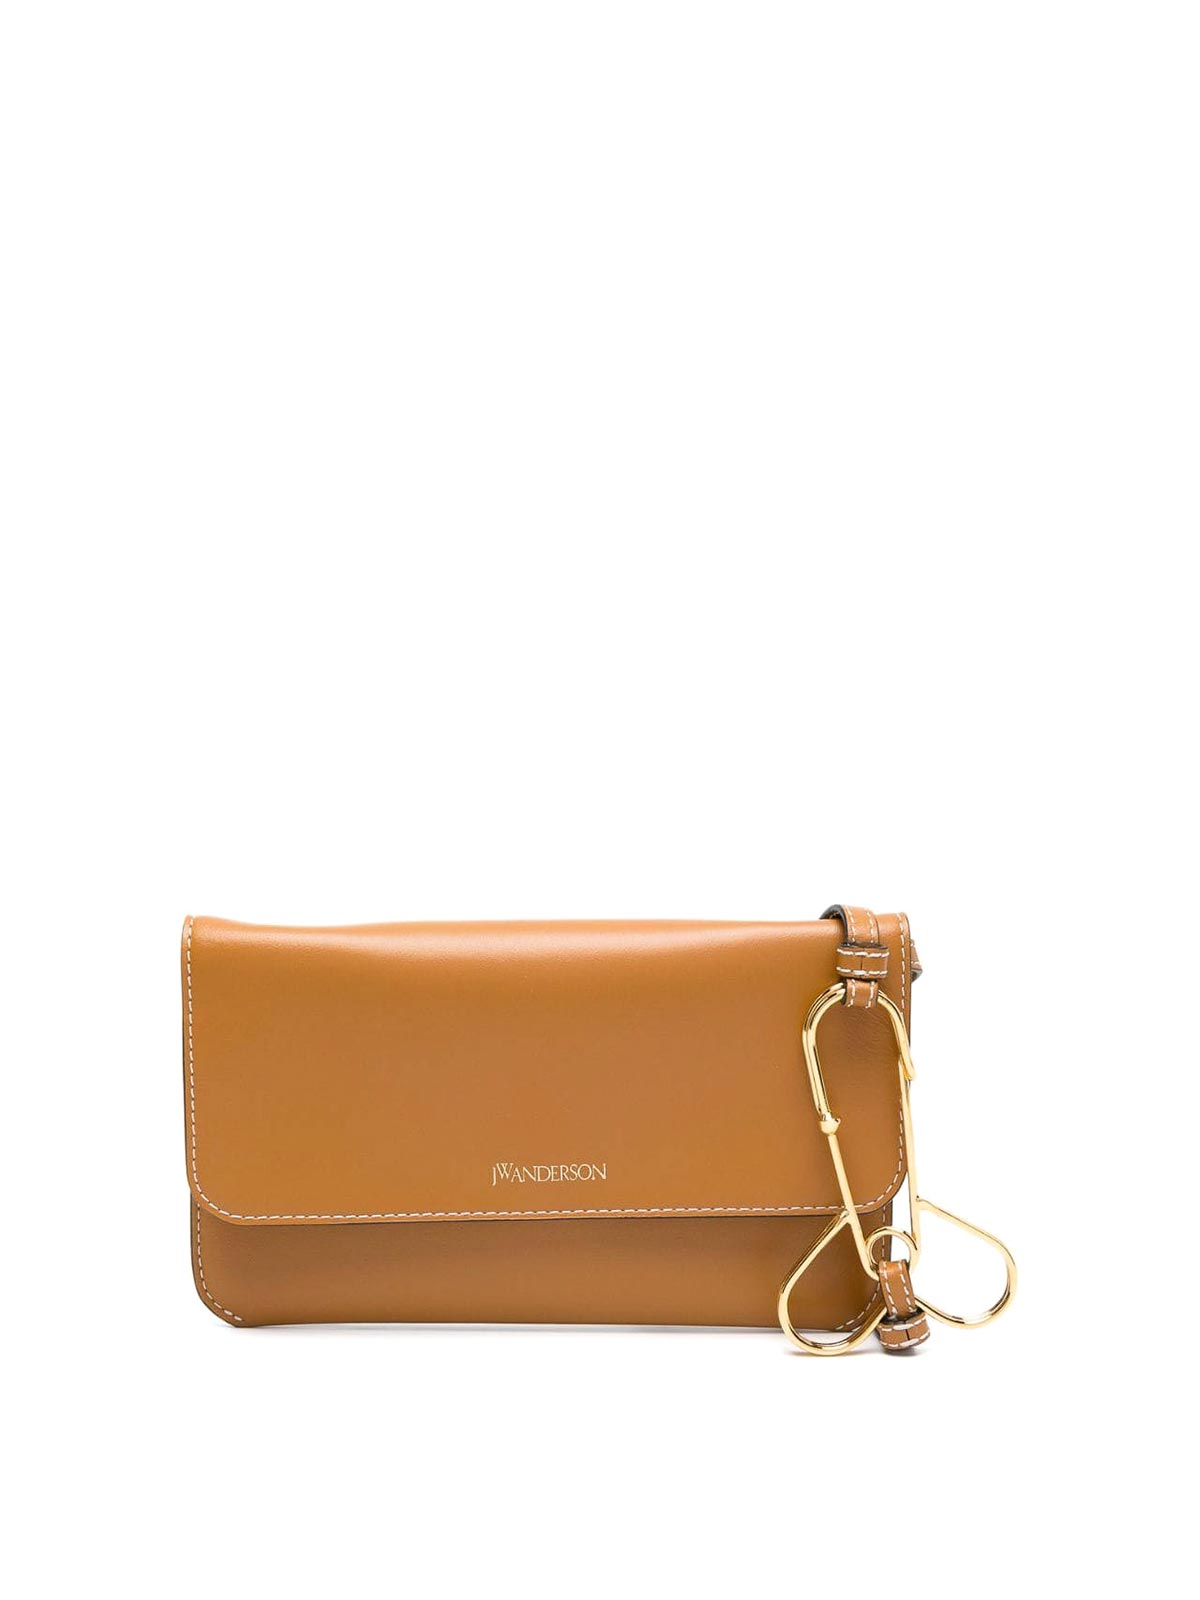 Jw Anderson Chain Phone Pouch In Red